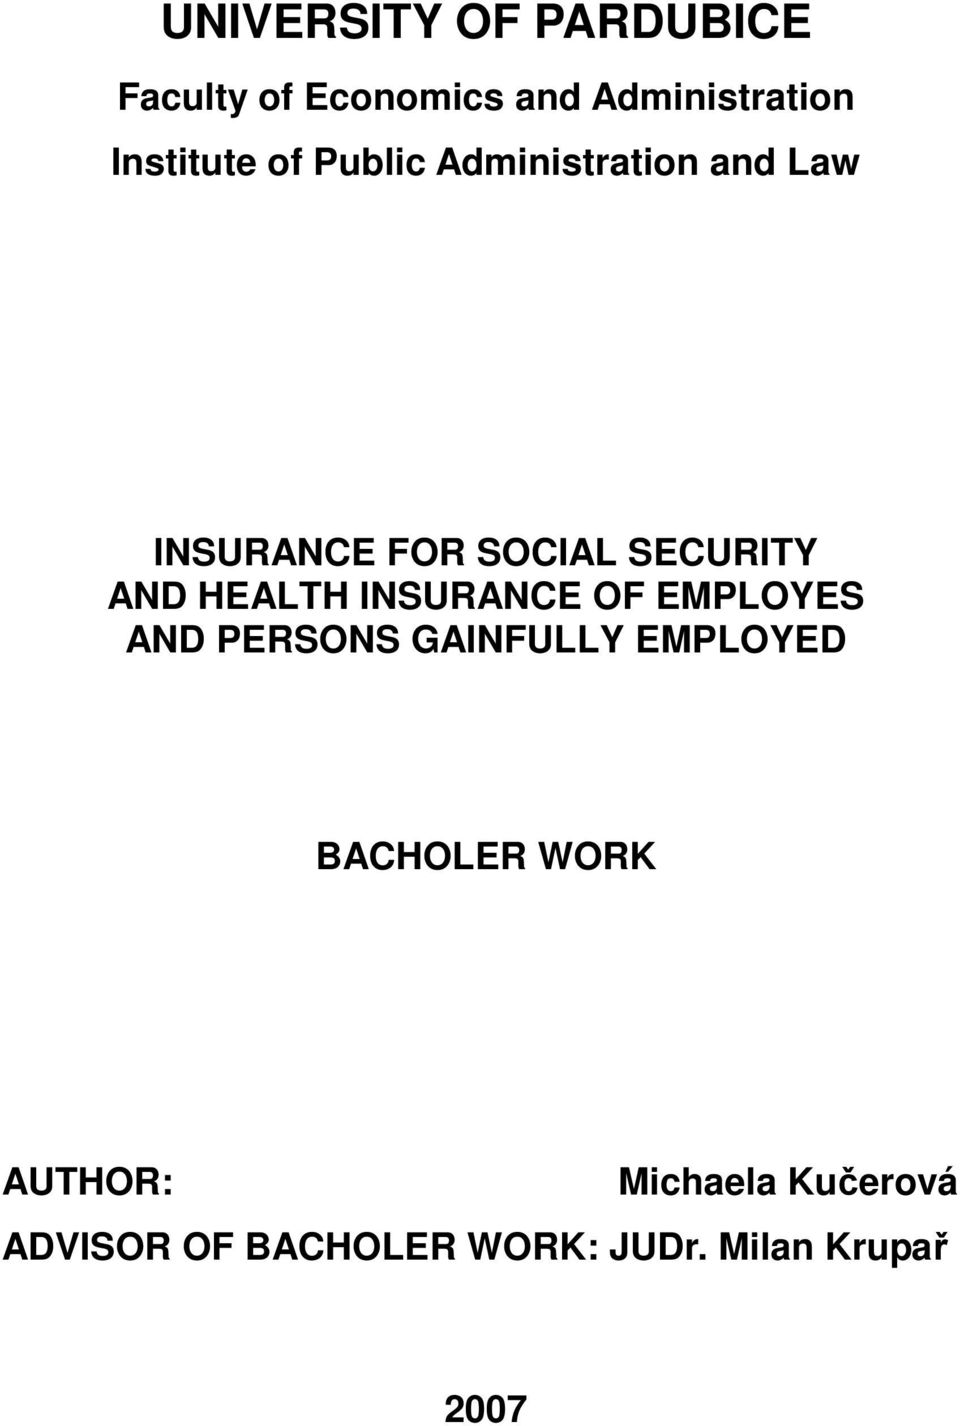 AND HEALTH INSURANCE OF EMPLOYES AND PERSONS GAINFULLY EMPLOYED BACHOLER